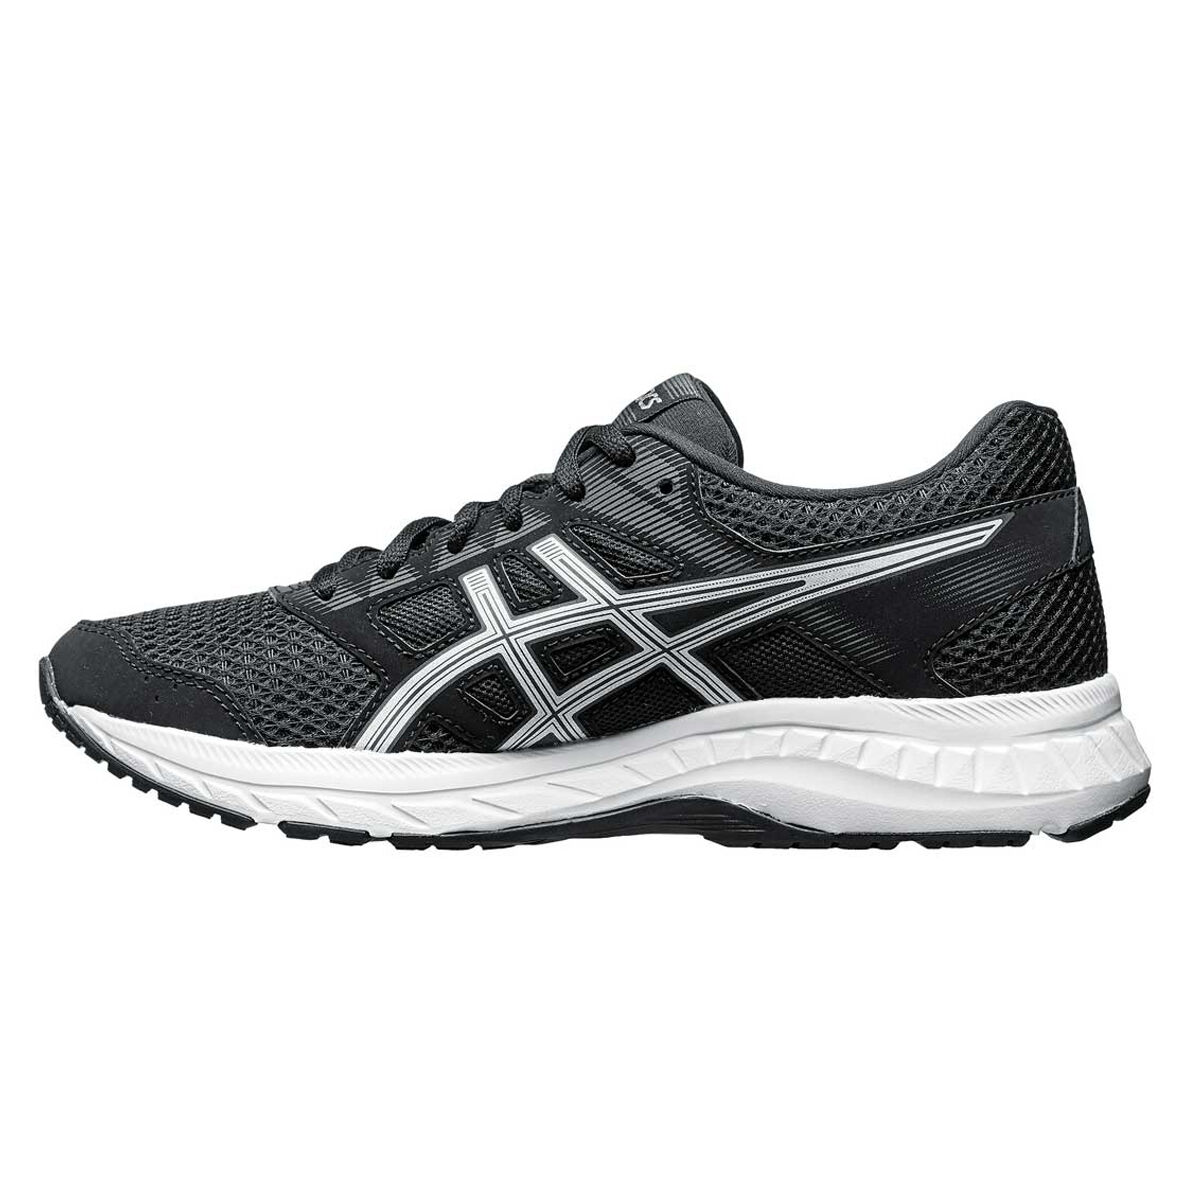 asics contend review